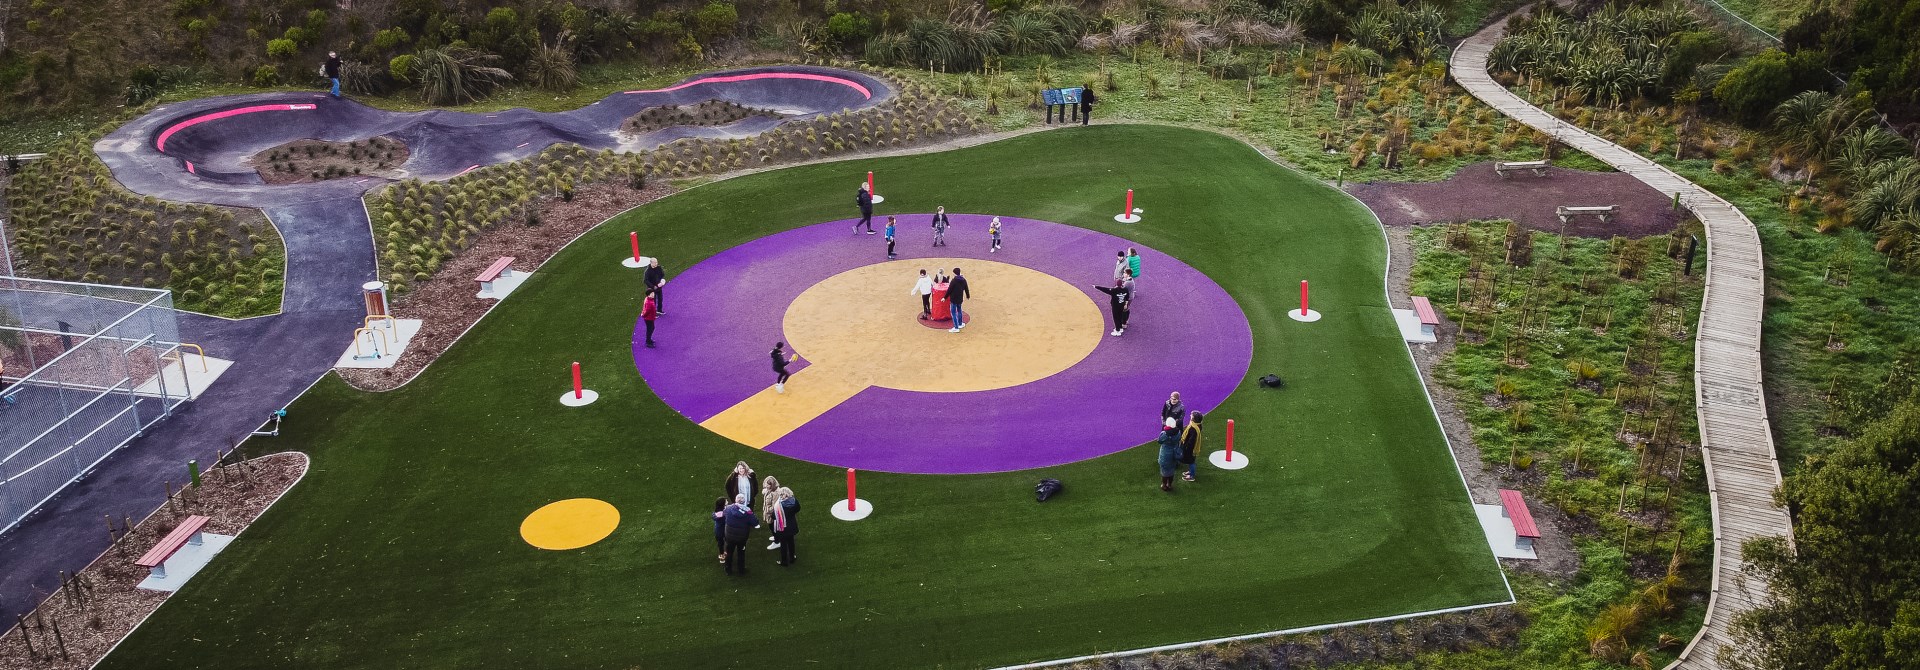 A birds eye view of the large yellow and purple Ki-O-Rahi pitch in the middle of a green grass field at Pukehuia Park in Newlands, with children playing.